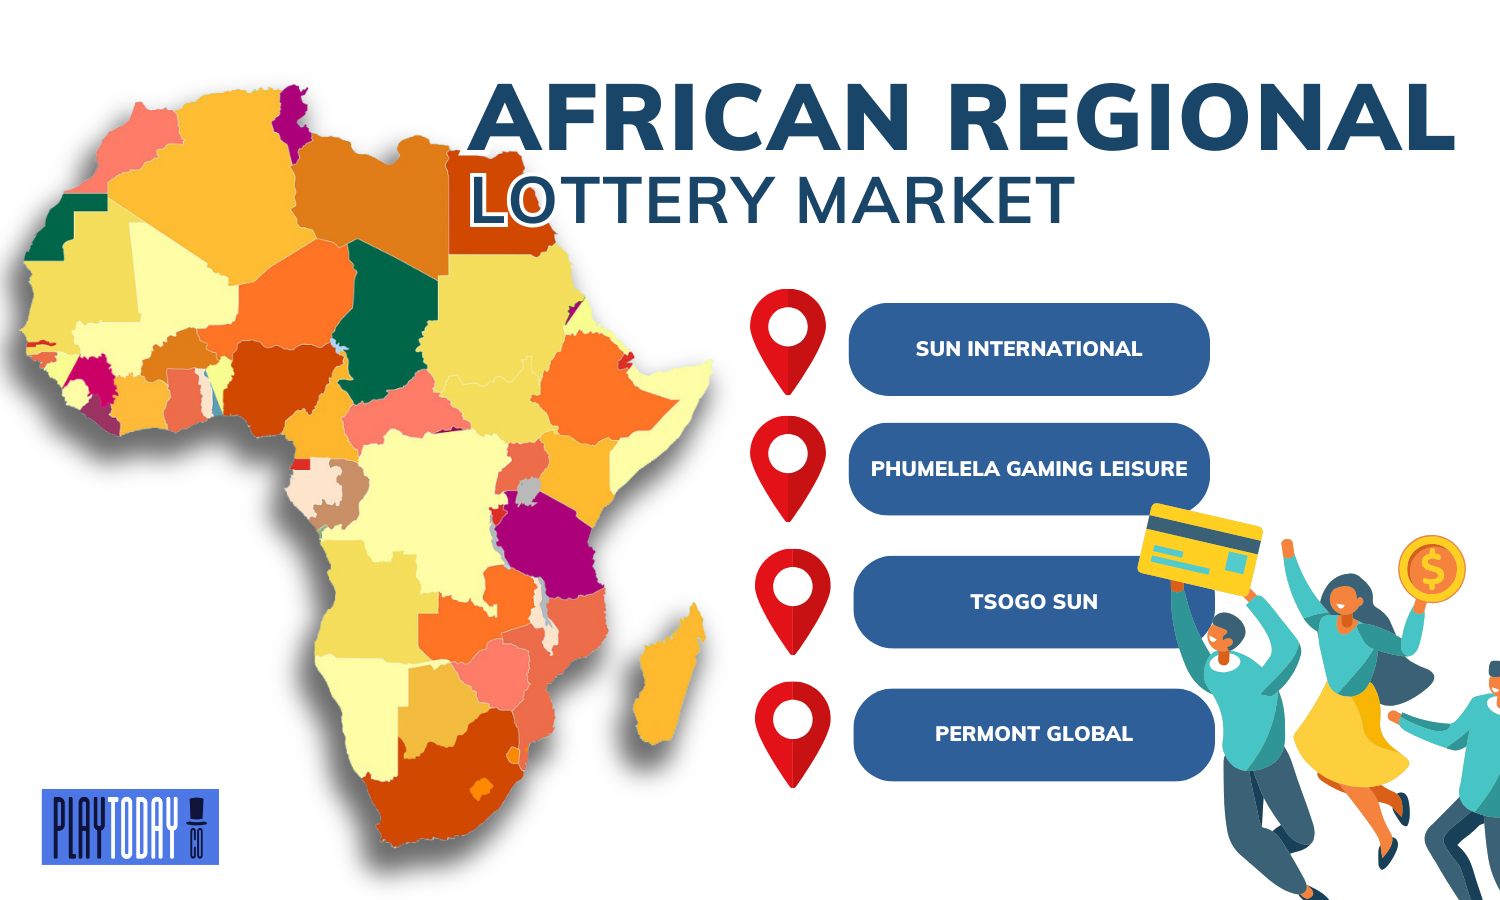 4 major players of the African regional Lottery market